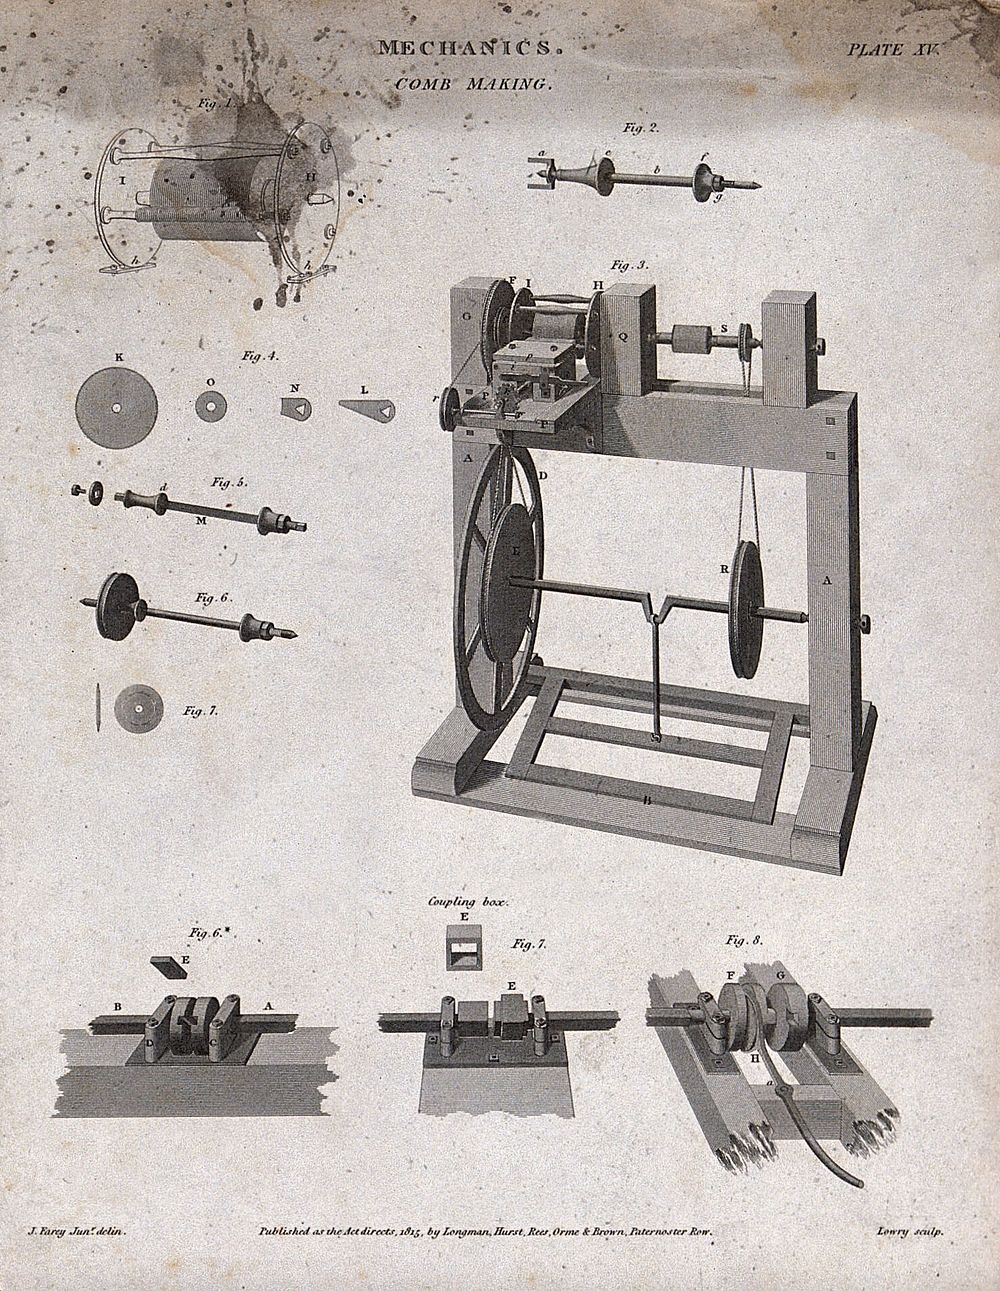 Machinery used in the making of combs, and details of its components. Engraving by E. Turrell after J. Farey.